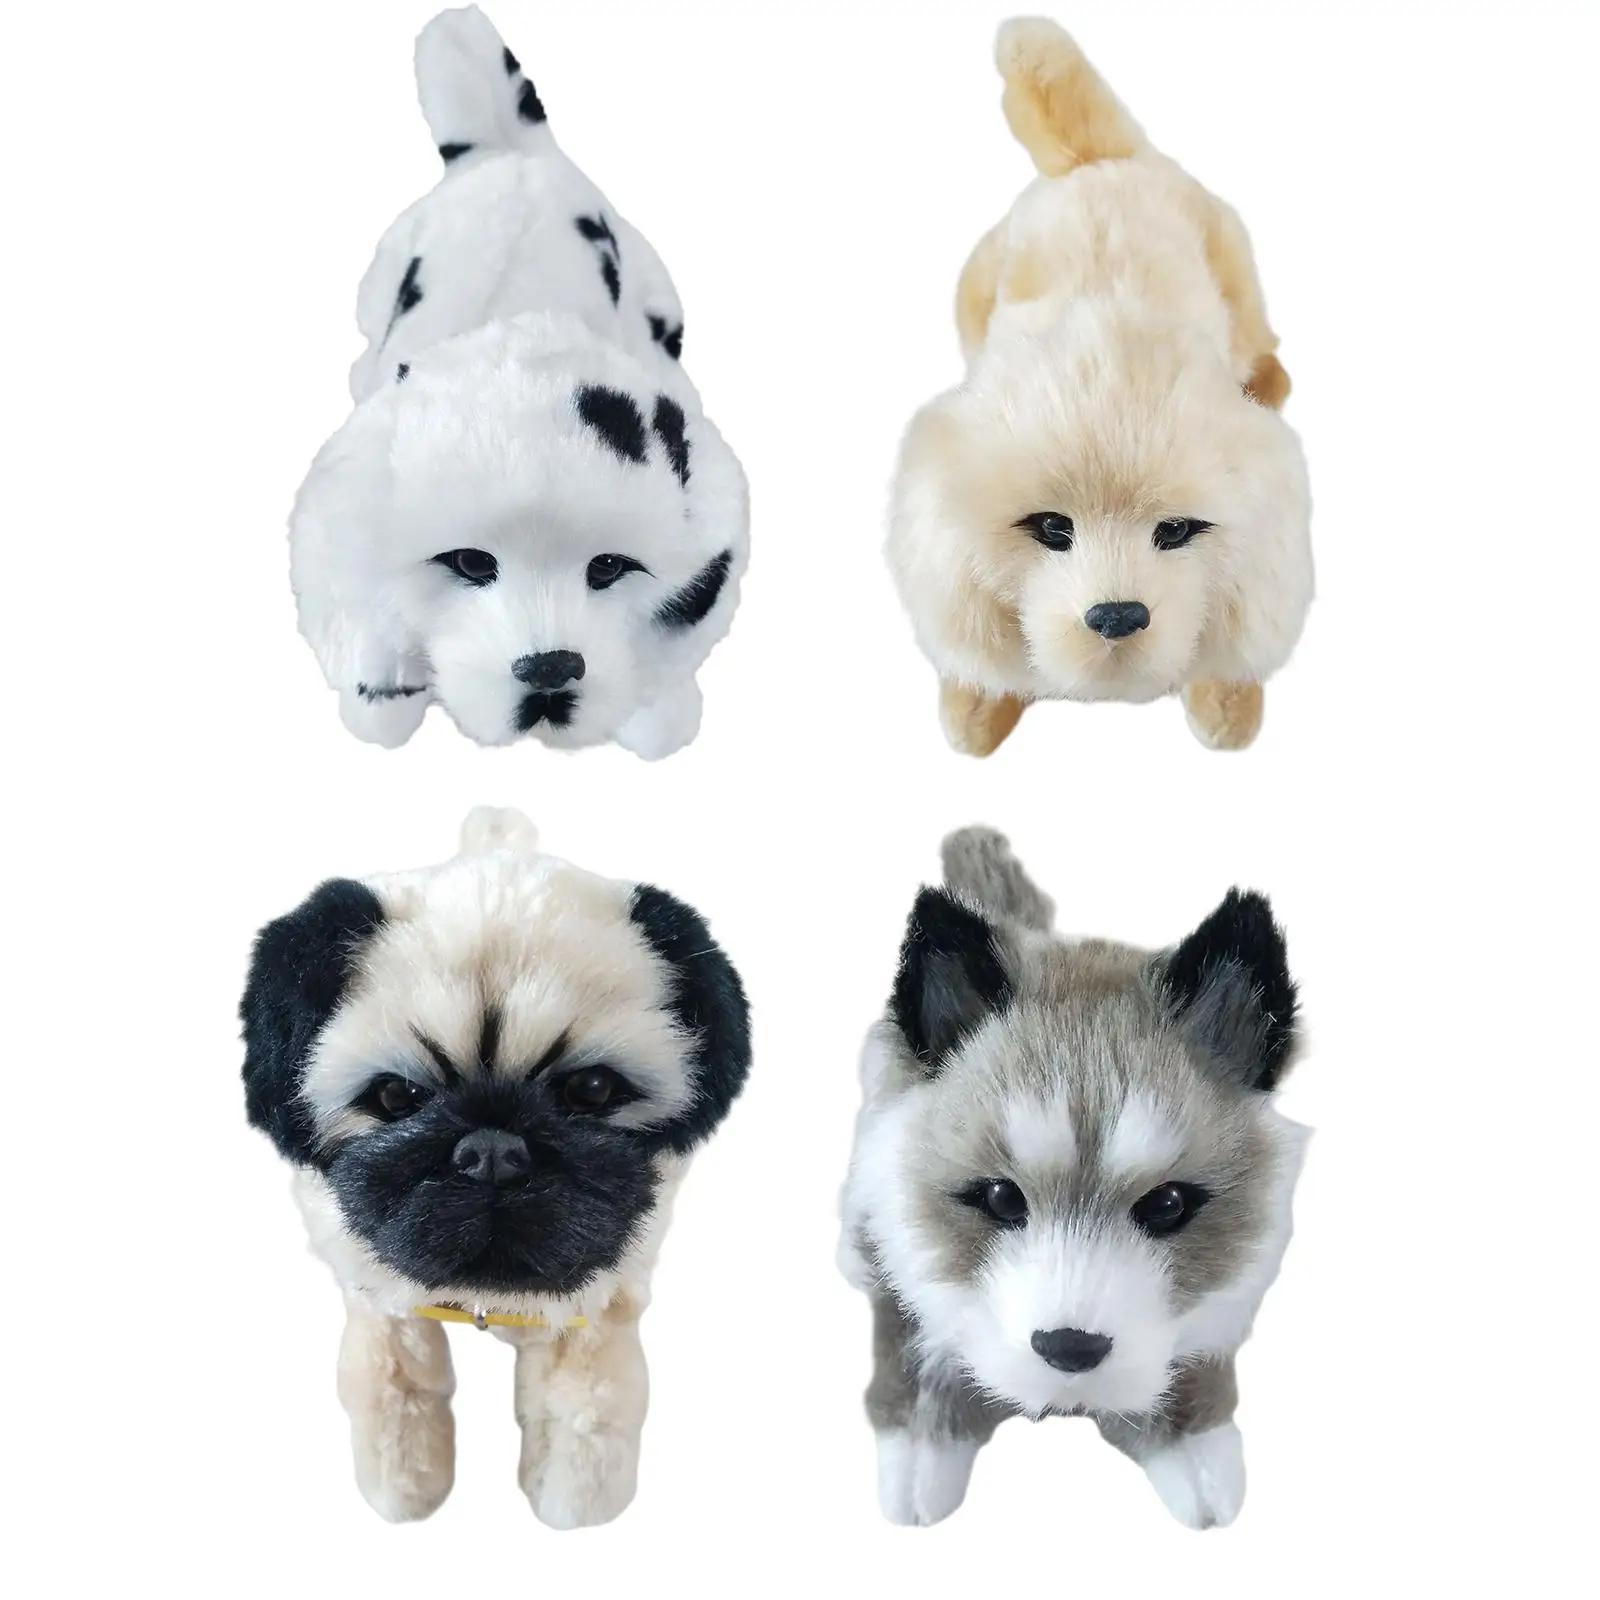 Plush Plush Dog Toys Companying Battery Operated Cute Soft Electric Flurfy Puppy Toy, for Gifts Birthday Hoilday Preschool Kids